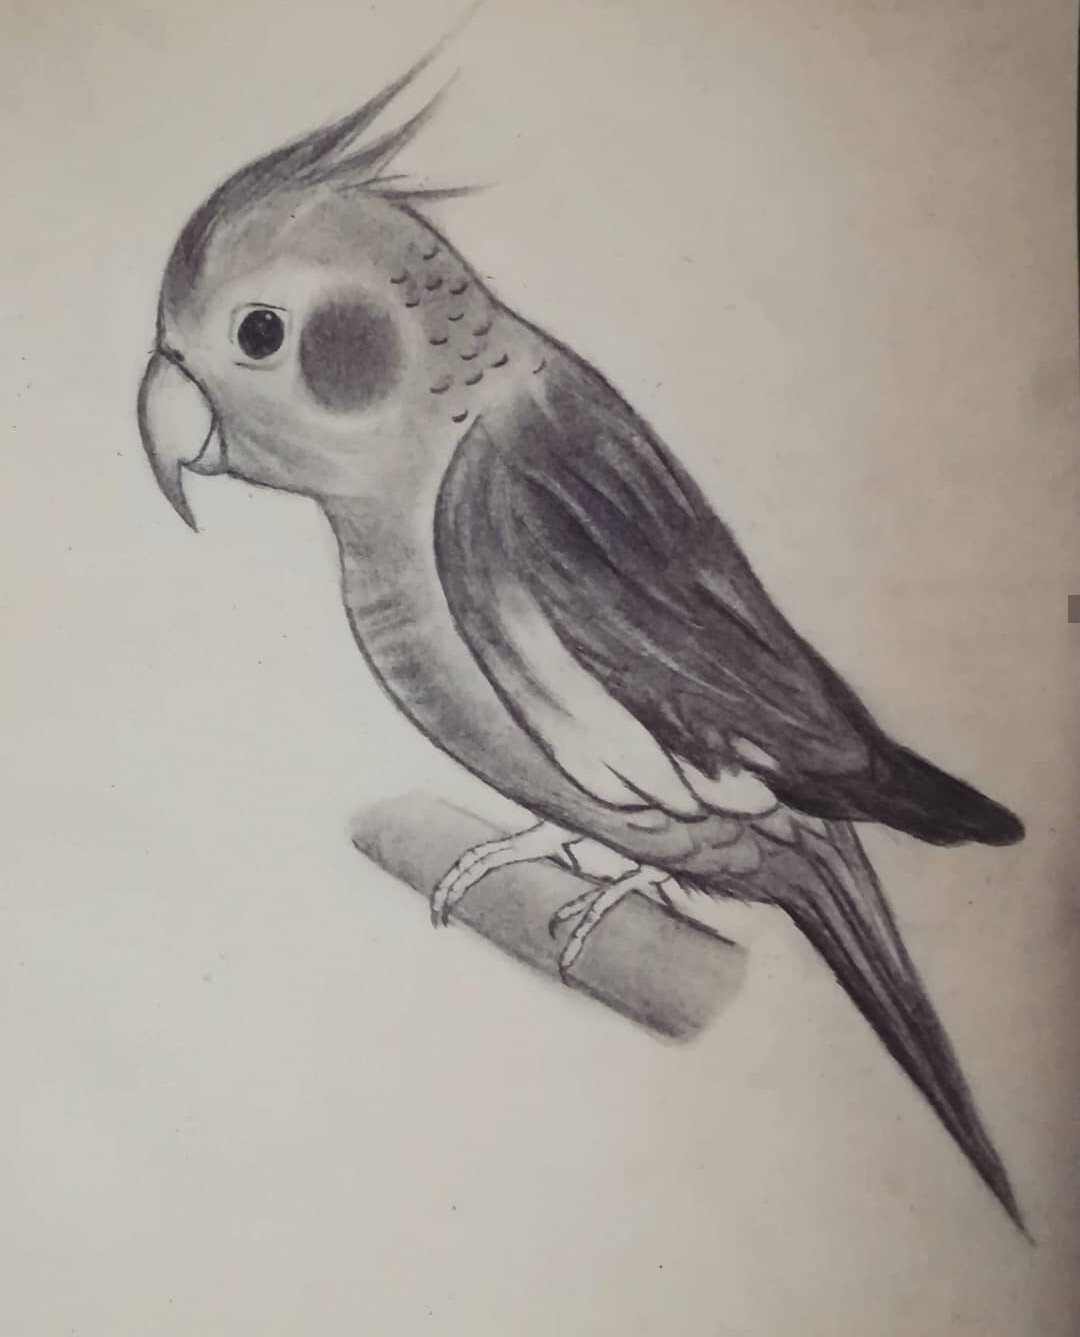 Incredible Compilation of 999+ Parrot Drawing Images - Stunning ...